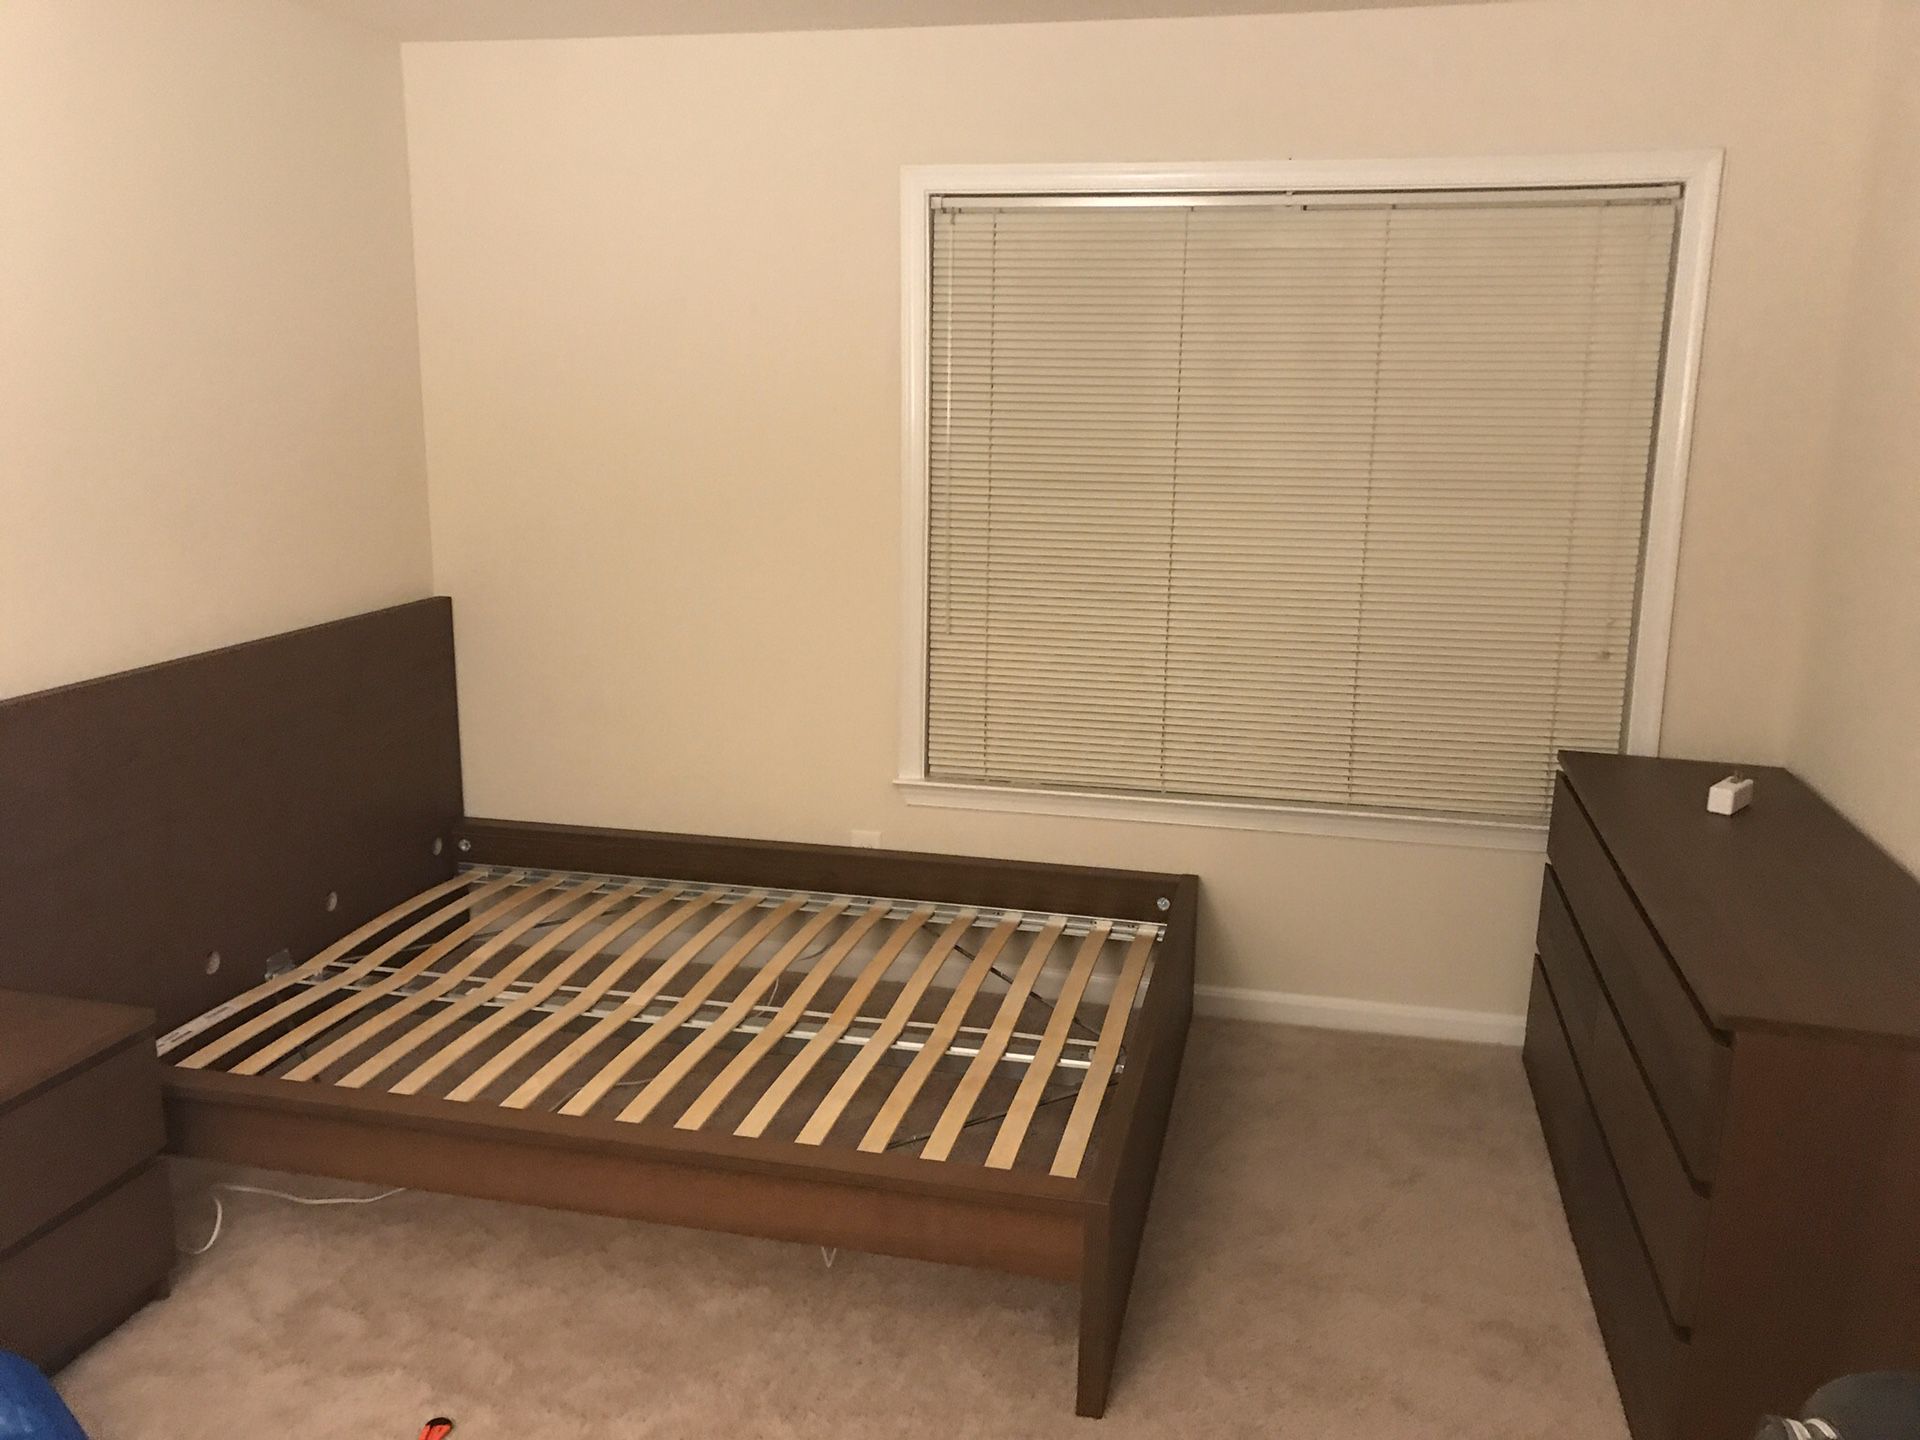 Ikea malm queen bed with 2 drawers